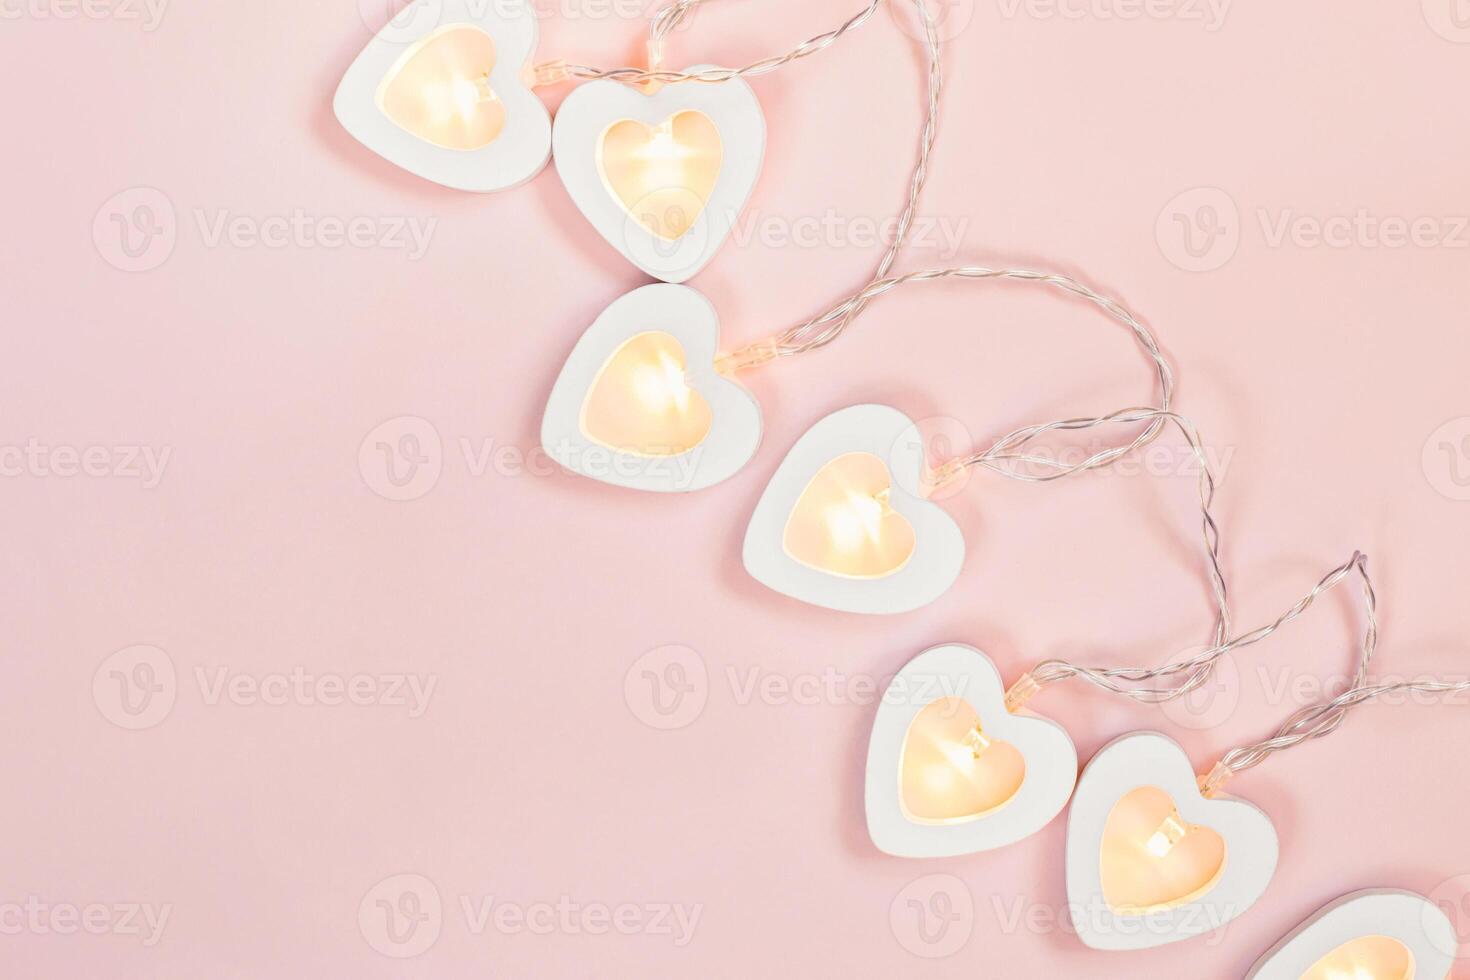 Heart shape garland on pink pastel background. Valentine's Day or wedding party decoration. Love concept photo